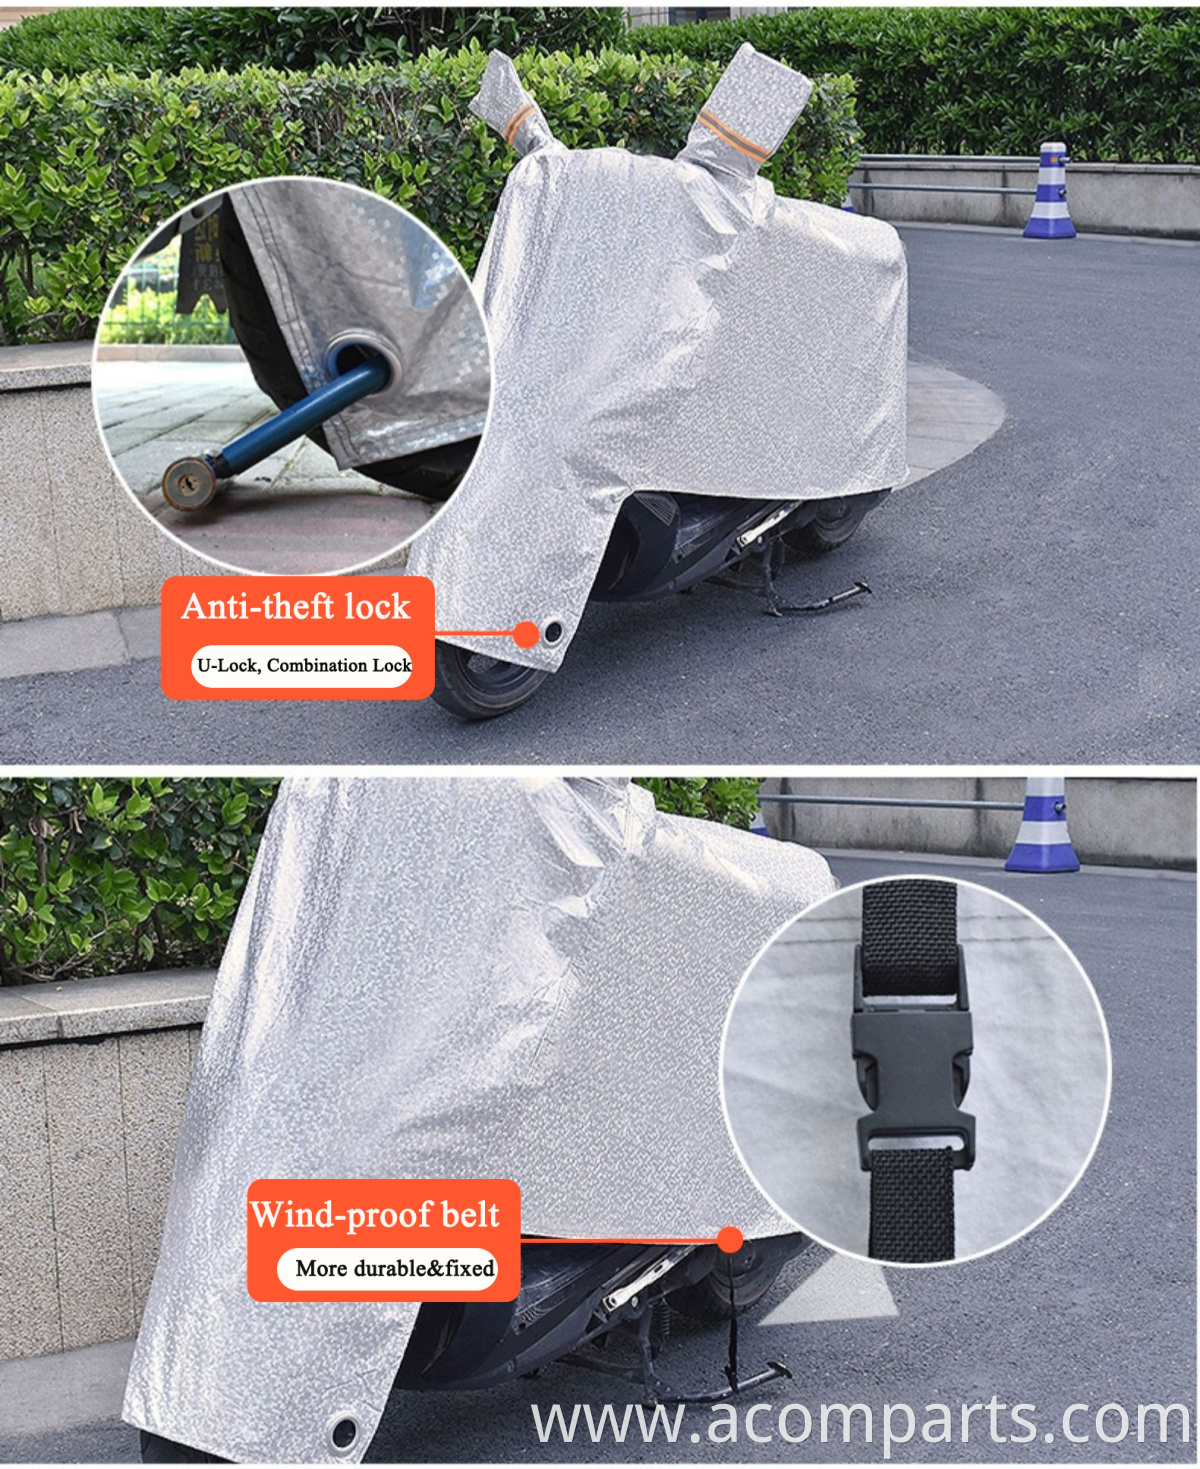 Waterproof anti UV durable all season sun protection custom cover for motorcycle